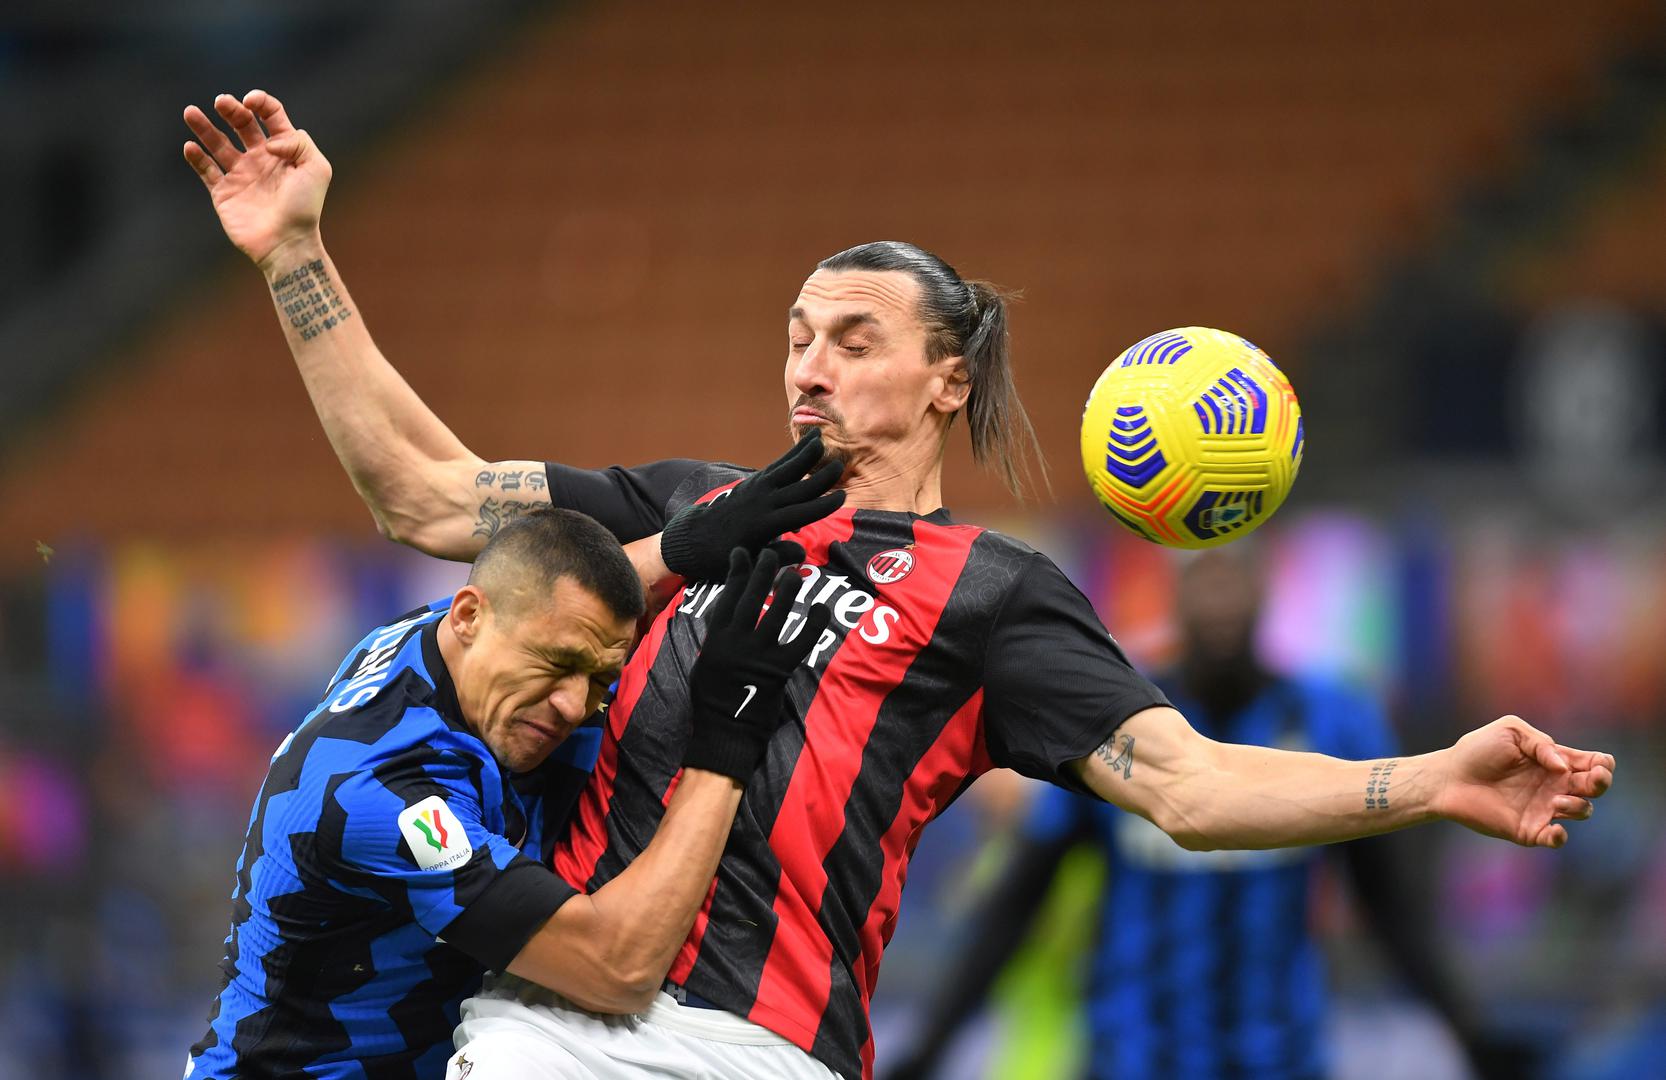 Coppa Italia - Quarter Final - Inter Milan v AC Milan Soccer Football - Coppa Italia - Quarter Final - Inter Milan v AC Milan - San Siro, Milan, Italy - January 26, 2021 Inter Milan's Alexis Sanchez in action with AC Milan's Zlatan Ibrahimovic REUTERS/Daniele Mascolo     TPX IMAGES OF THE DAY DANIELE MASCOLO